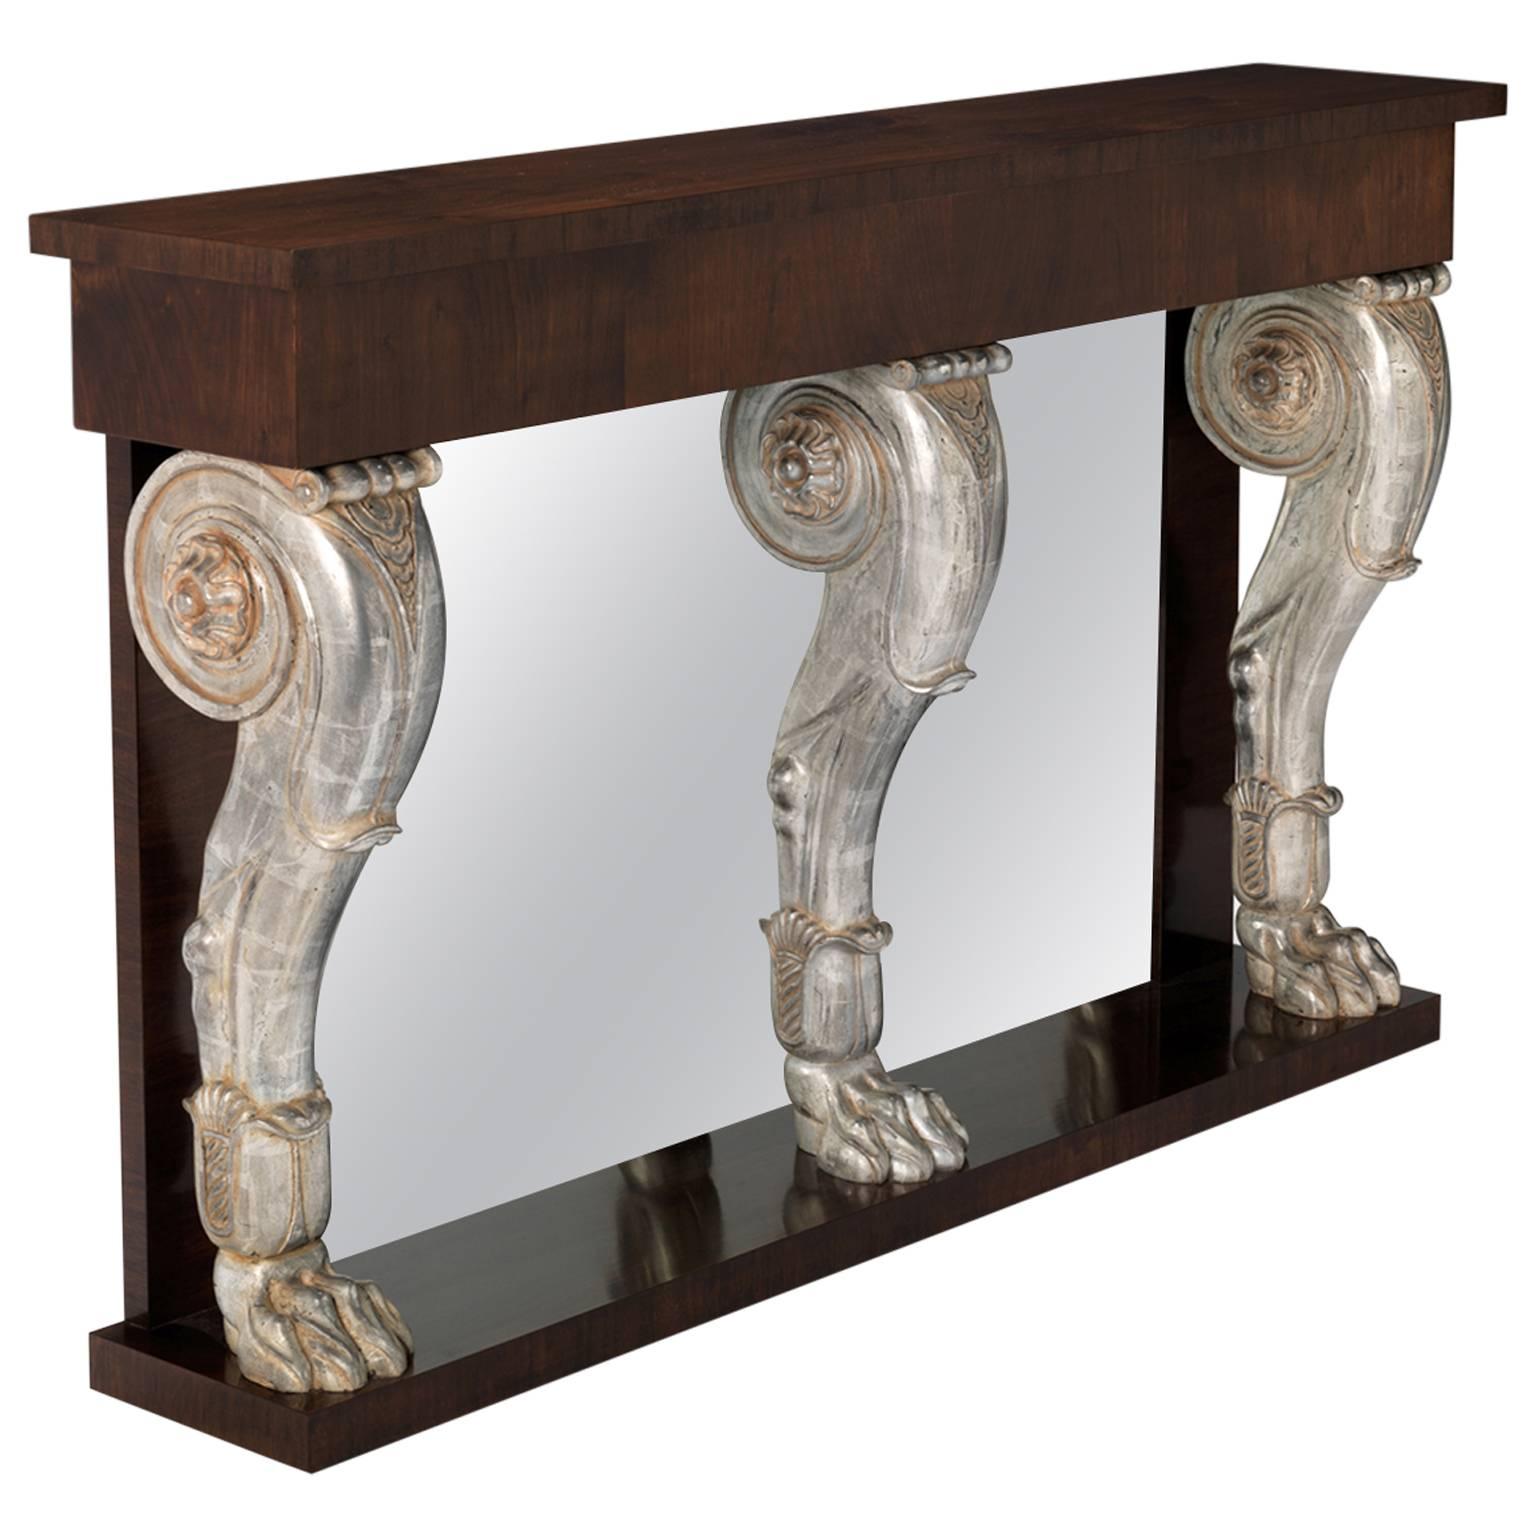 Hall Console in the Regency manner